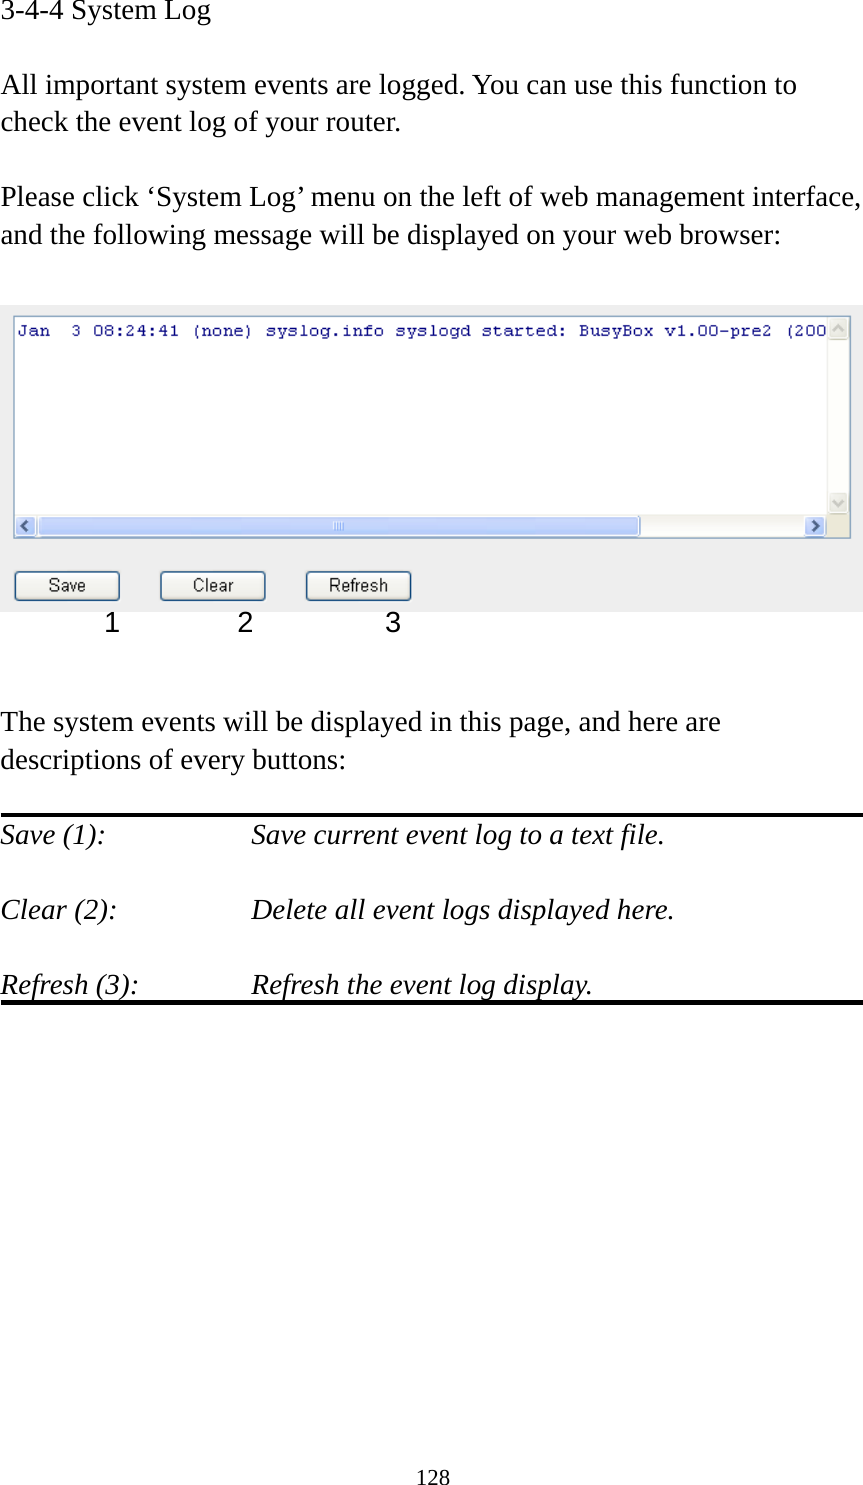 128 3-4-4 System Log  All important system events are logged. You can use this function to check the event log of your router.  Please click ‘System Log’ menu on the left of web management interface, and the following message will be displayed on your web browser:     The system events will be displayed in this page, and here are descriptions of every buttons:  Save (1):        Save current event log to a text file.  Clear (2):        Delete all event logs displayed here.  Refresh (3):      Refresh the event log display.            1 2  3